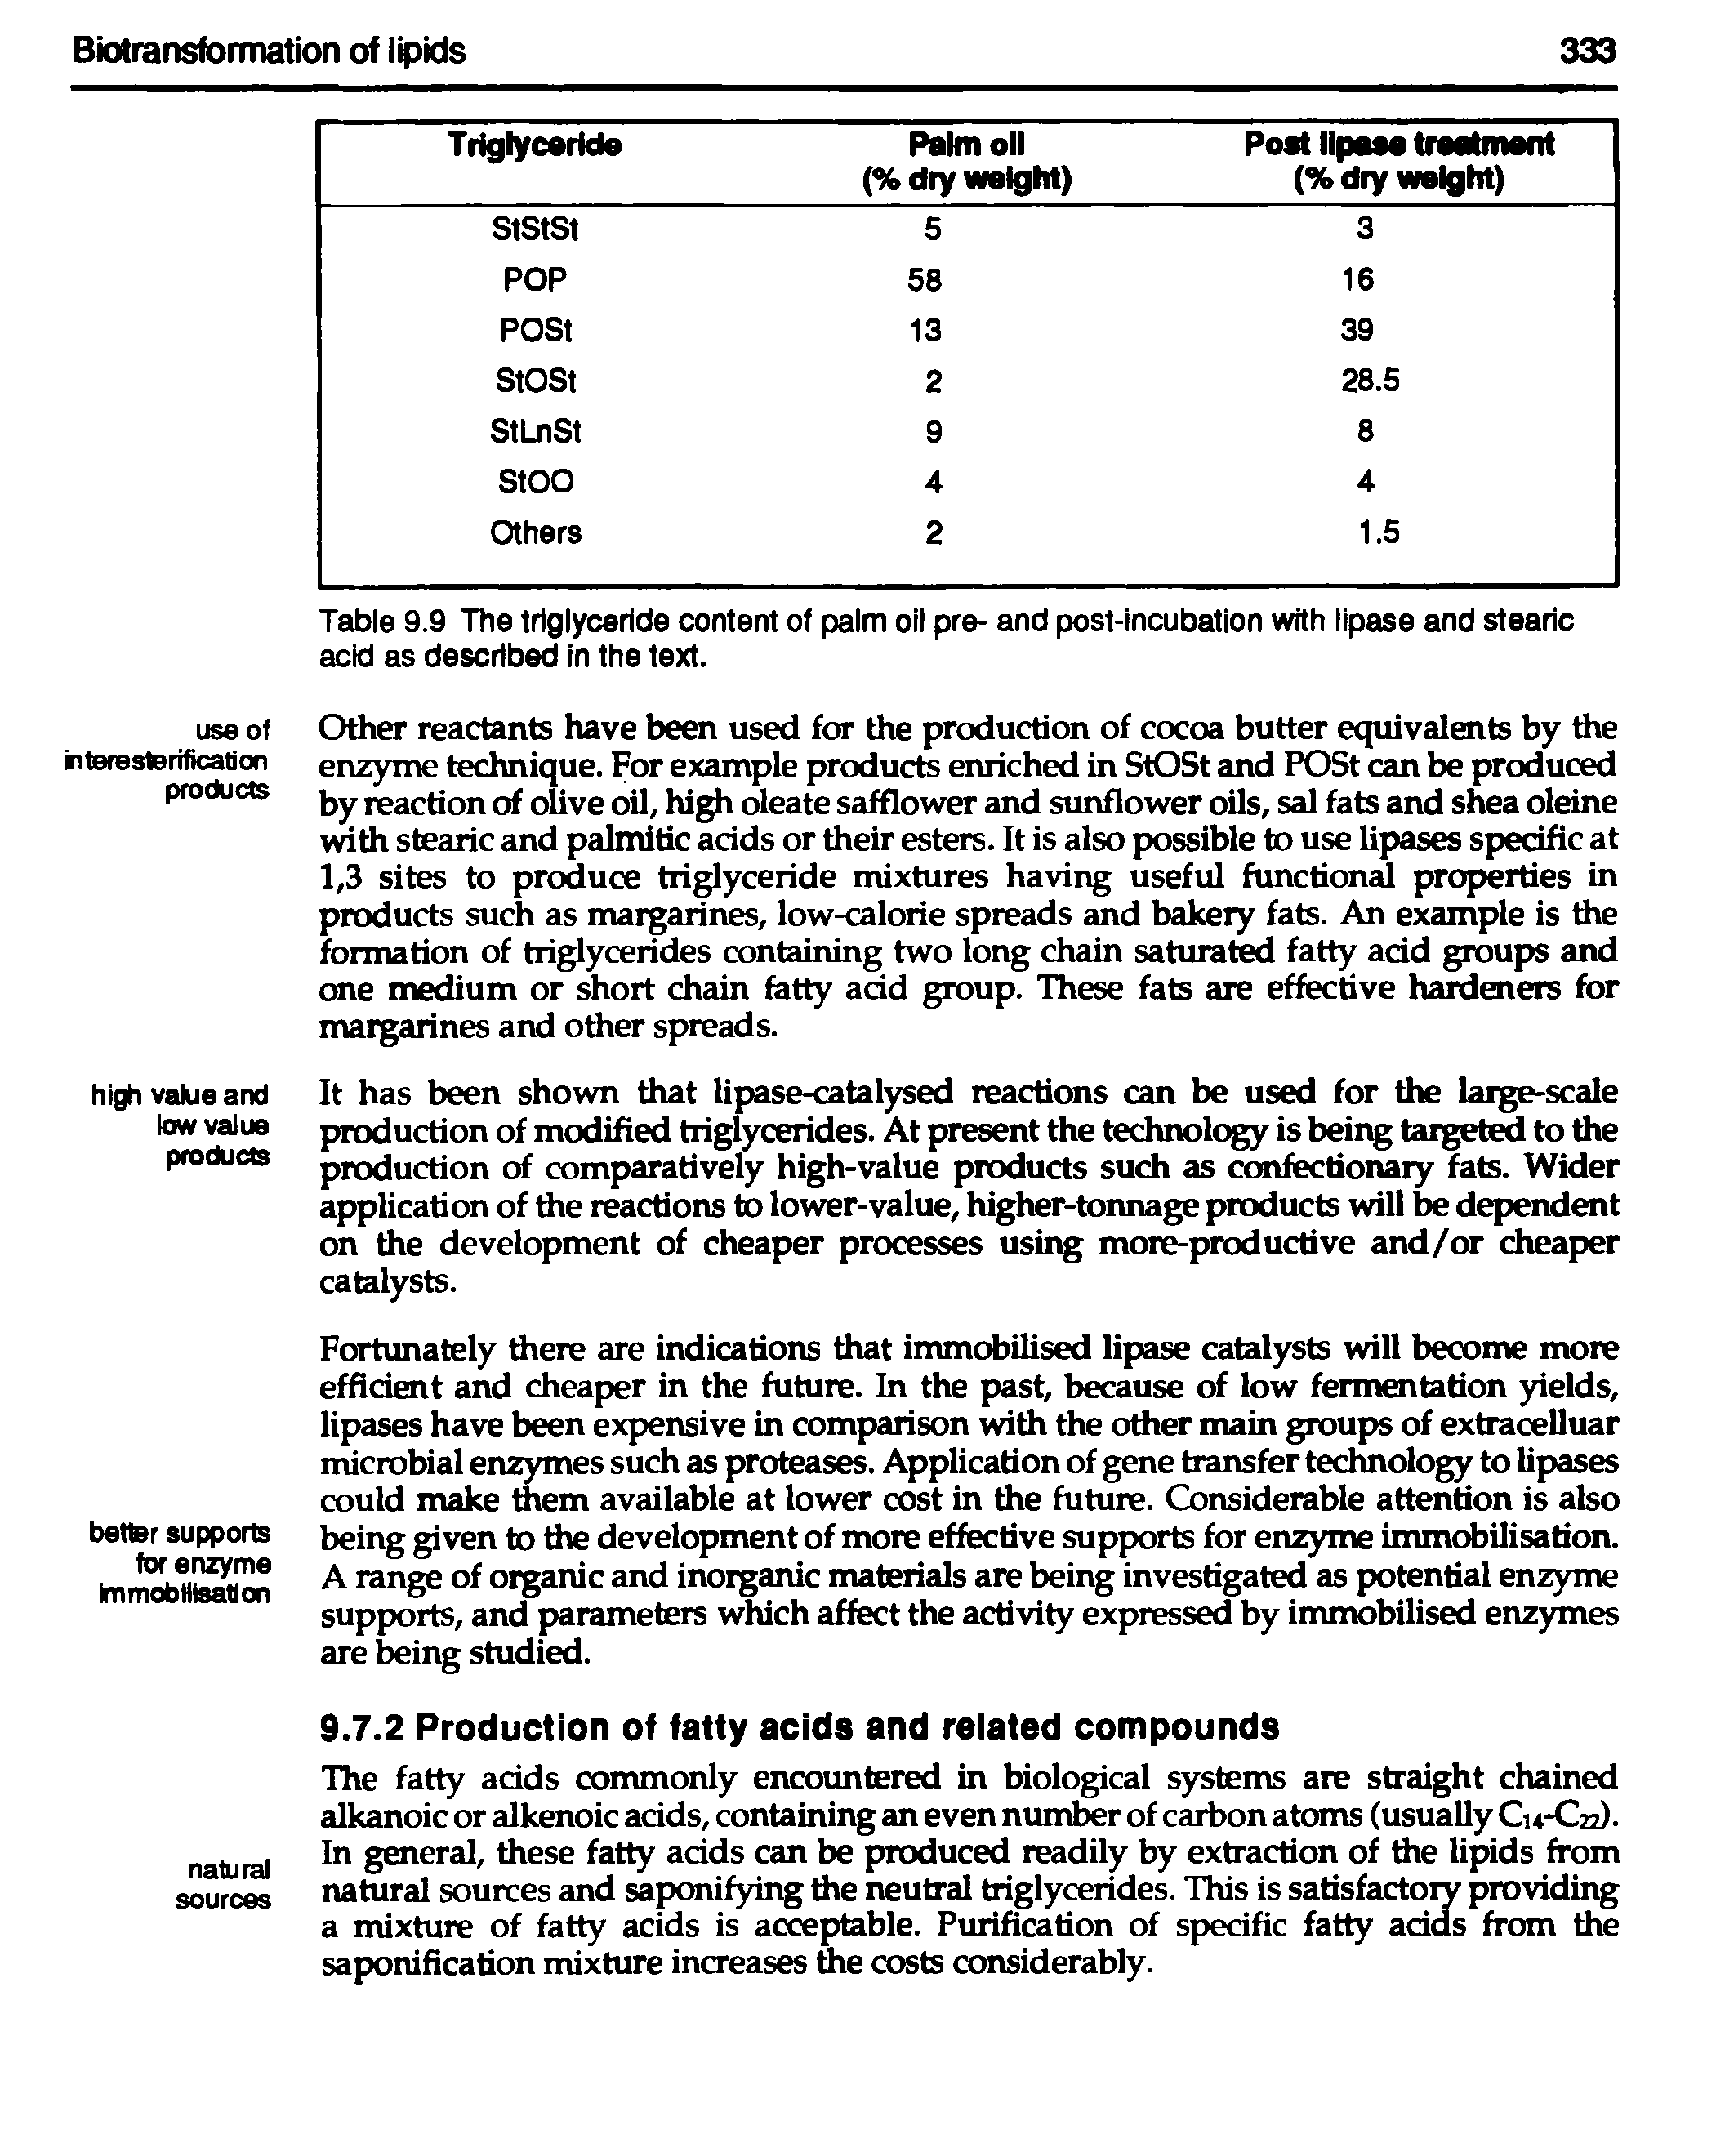 Table 9.9 The triglyceride content of palm oil pre- and post-incubation with lipase and stearic acid as described in the text.